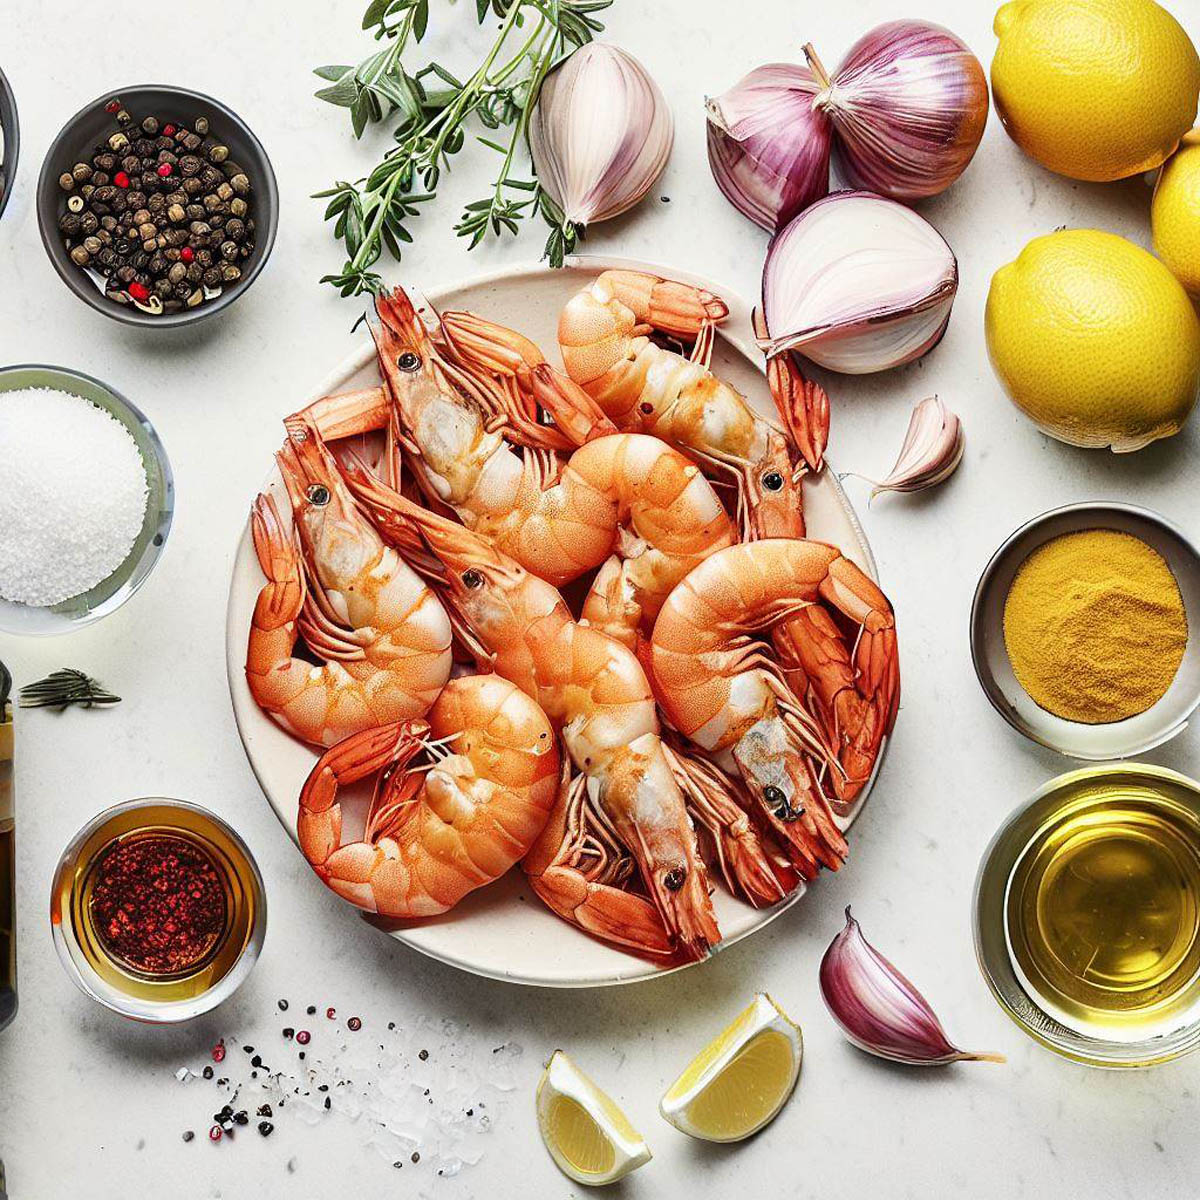 Arranged raw ingredients for Texas Roadhouse grilled shrimp recipe